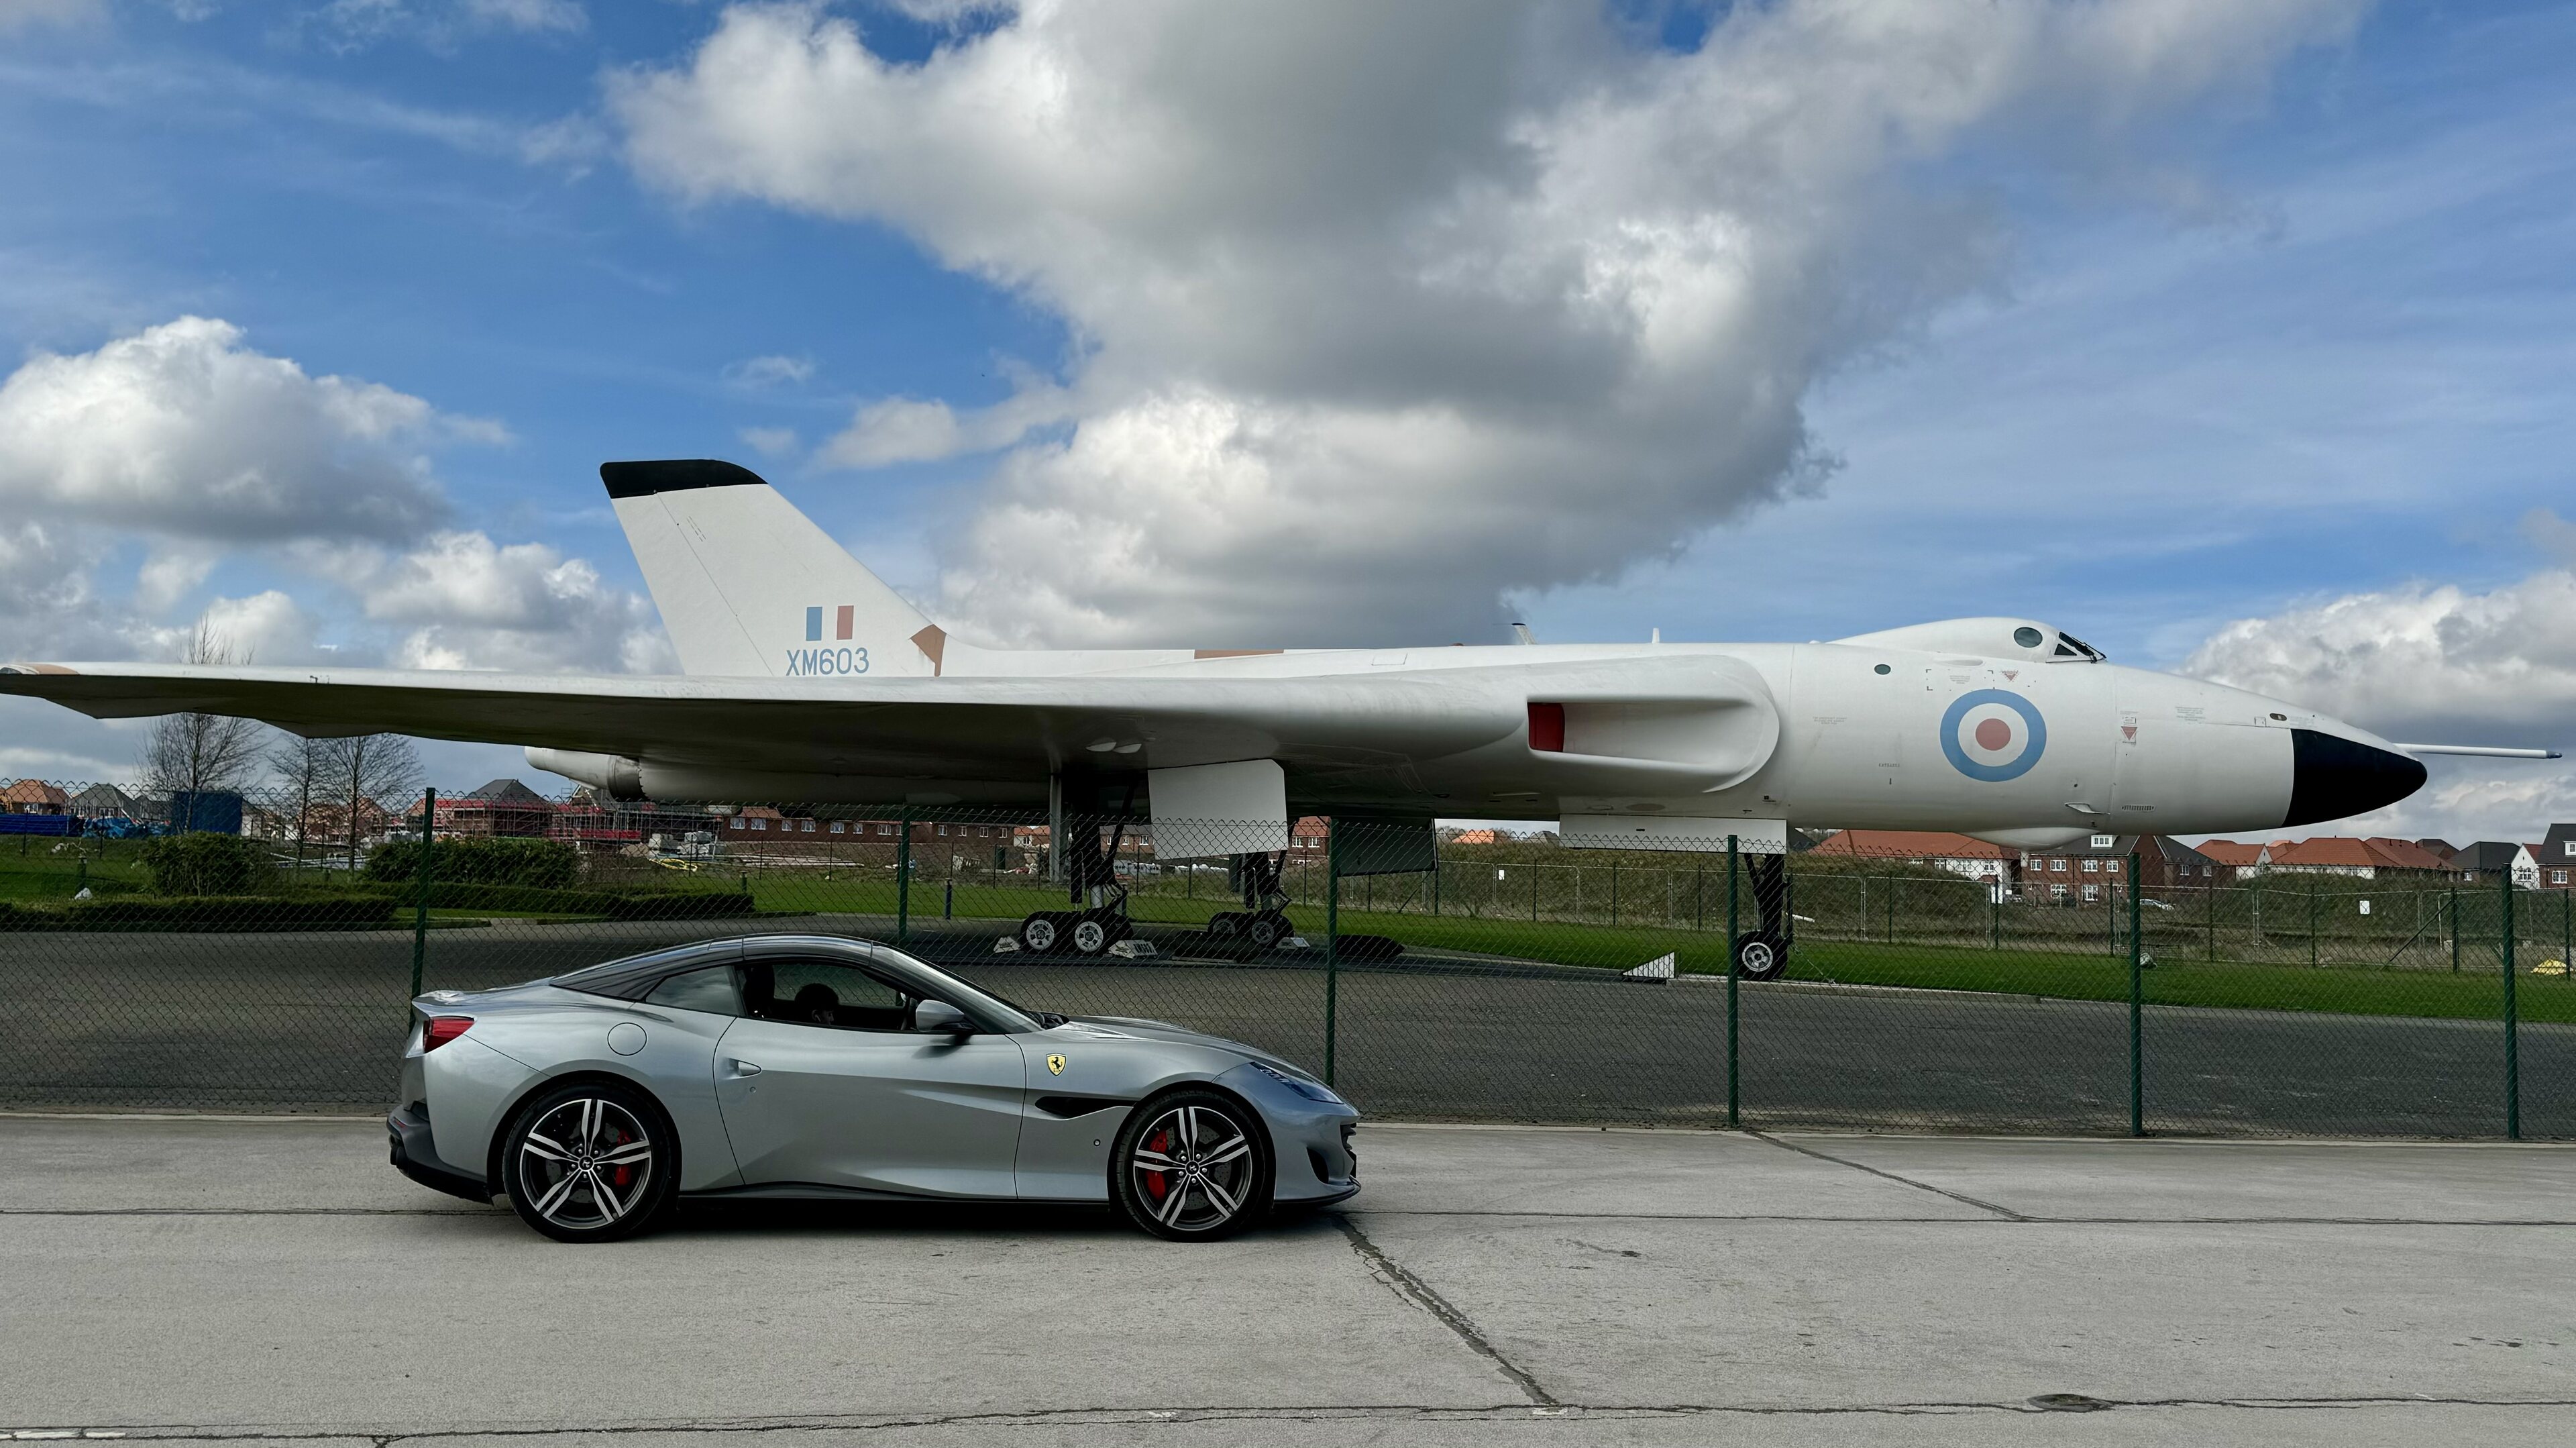 Vulcan bomber info  - Page 2 - Boats, Planes & Trains - PistonHeads UK - The image depicts a scene at an airfield. In the foreground, there's a silver car parked on the tarmac. Behind it, a large military aircraft is prominently displayed. The jet has a camouflage pattern and bears the markings of a particular military service. The sky is clear with a few scattered clouds, indicating good weather conditions. There are also some fences and trees visible in the background, suggesting the presence of other facilities or vegetation around the airfield.